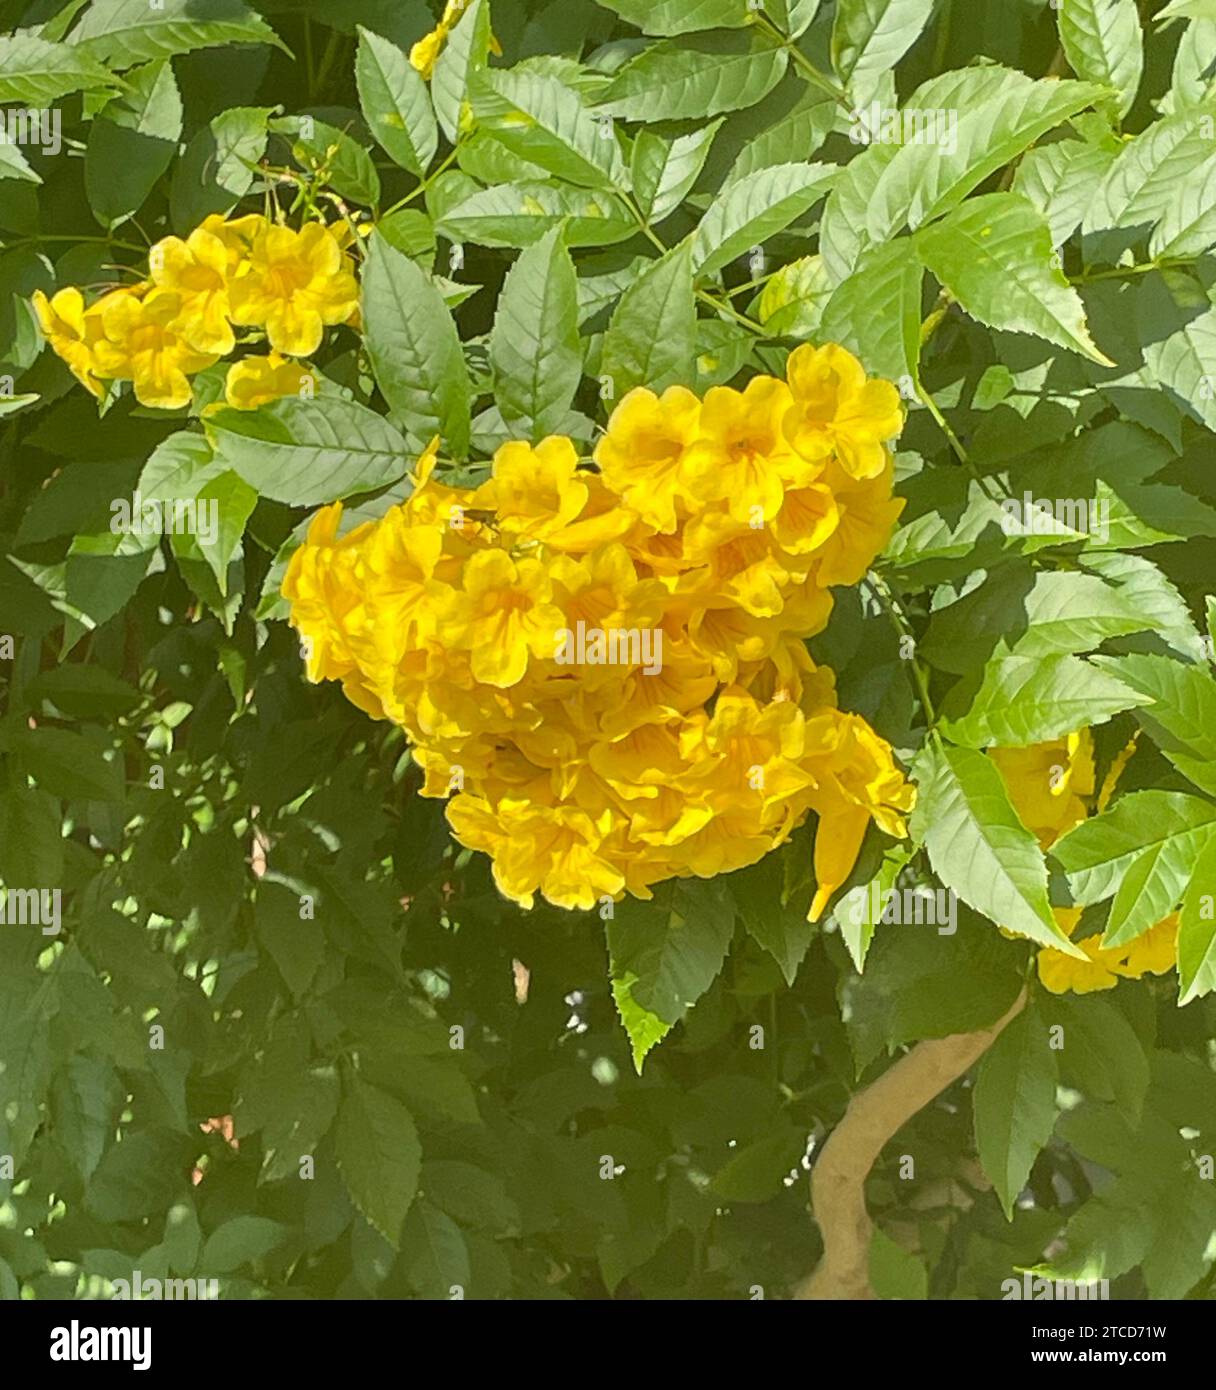 A close-up image of a vibrant yellow flowering plant in front of a backdrop of tall trees Stock Photo